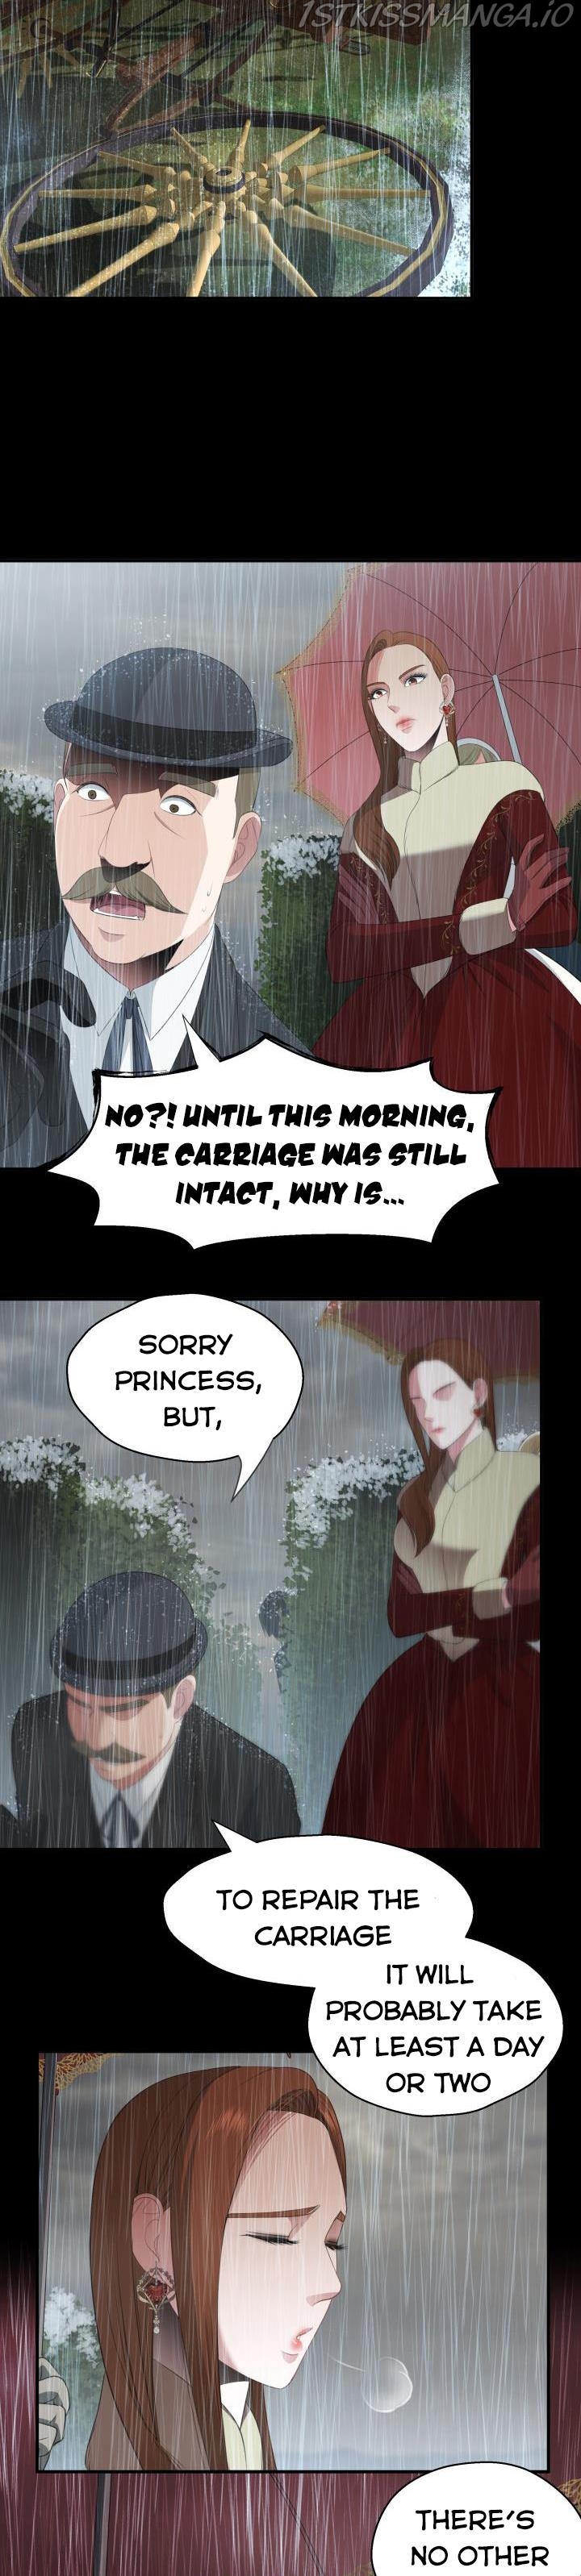 How can a time-limited evil gain her vengeance? Chapter 25 - Page 6